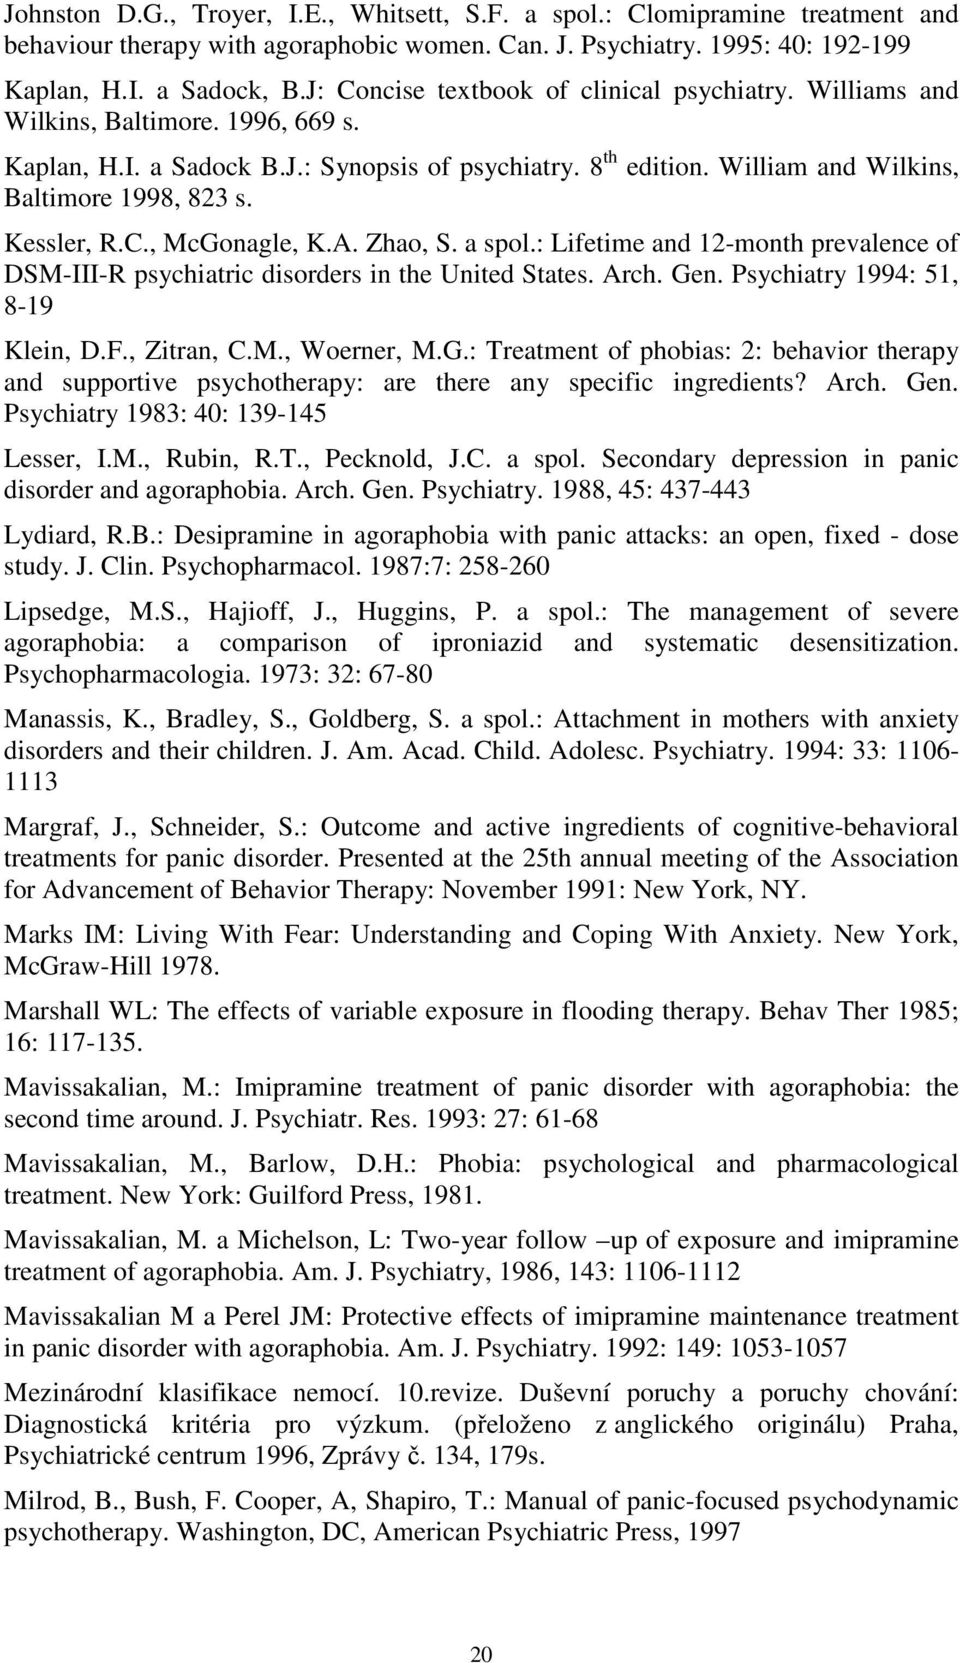 Kessler, R.C., McGonagle, K.A. Zhao, S. a spol.: Lifetime and 12-month prevalence of DSM-III-R psychiatric disorders in the United States. Arch. Gen. Psychiatry 1994: 51, 8-19 Klein, D.F., Zitran, C.